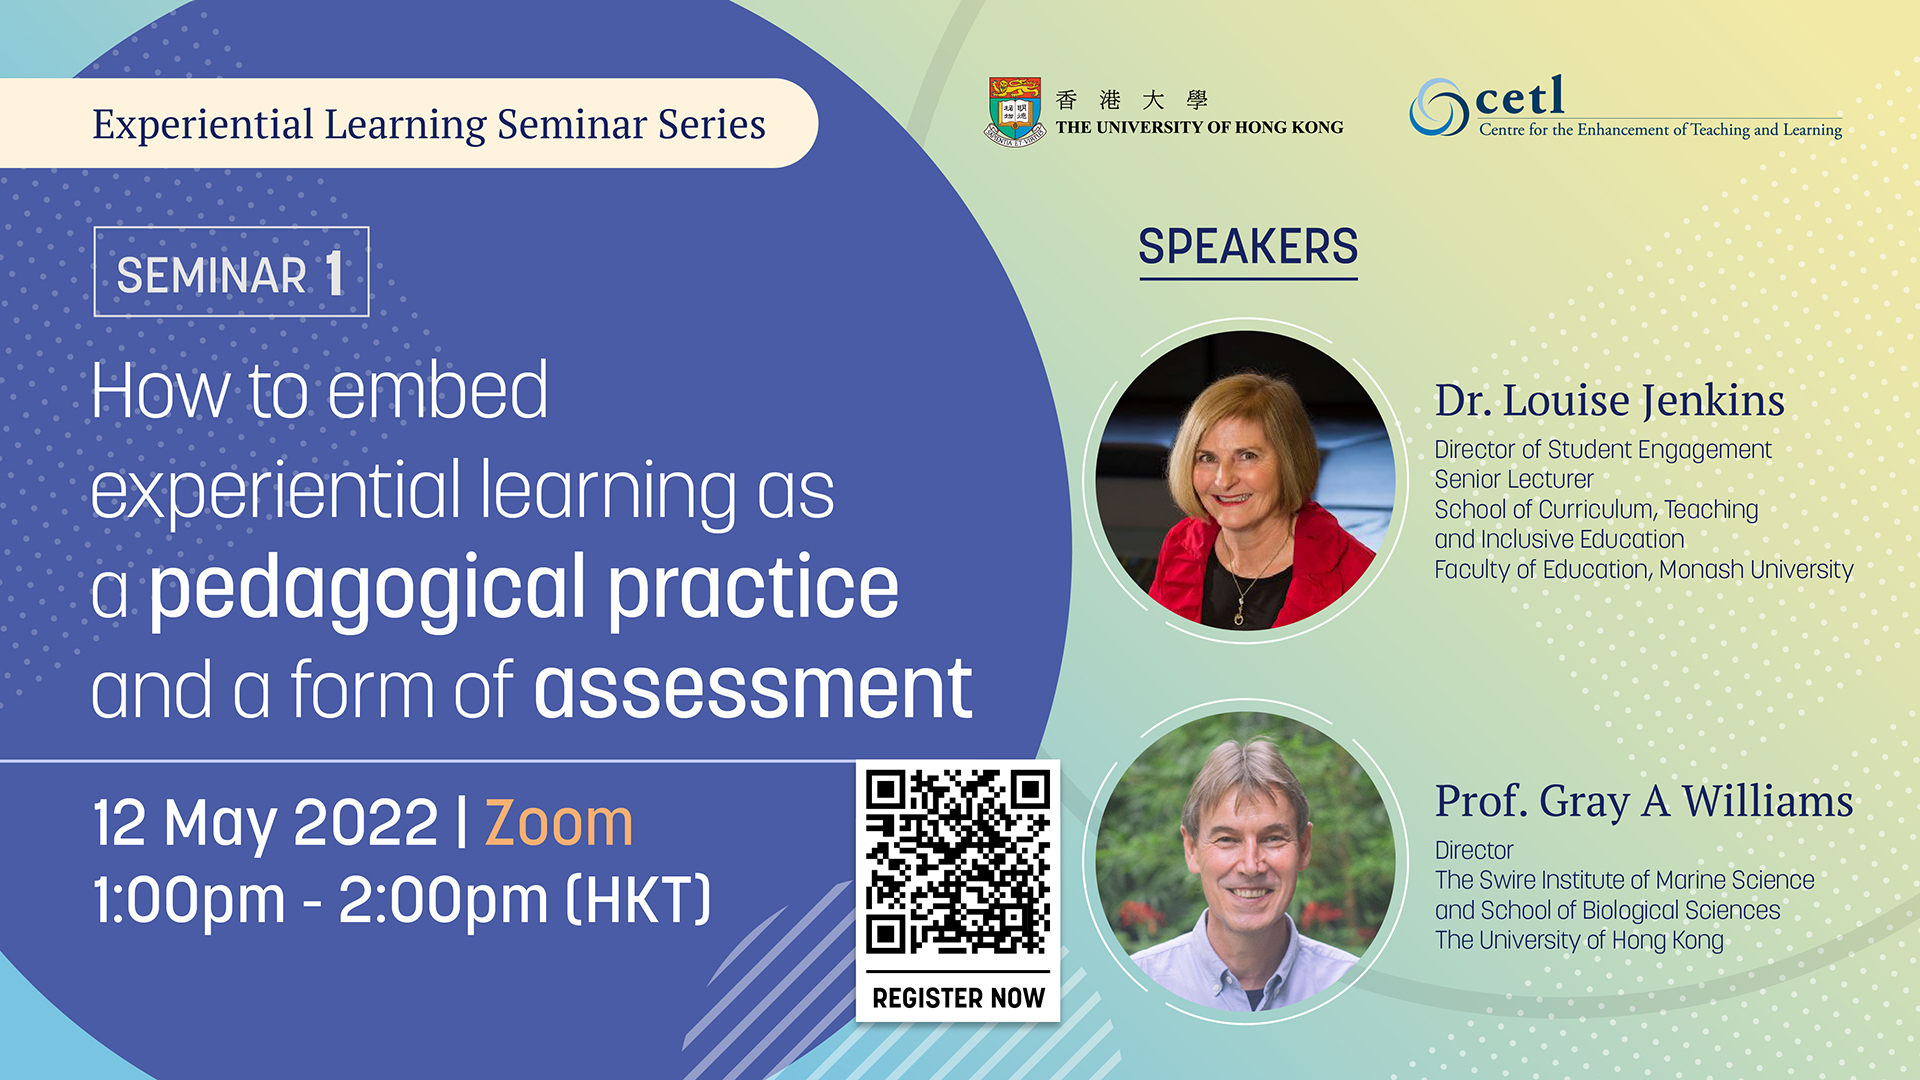 Seminar 1 - How to embed experiential learning as a pedagogical practice and a form of assessment